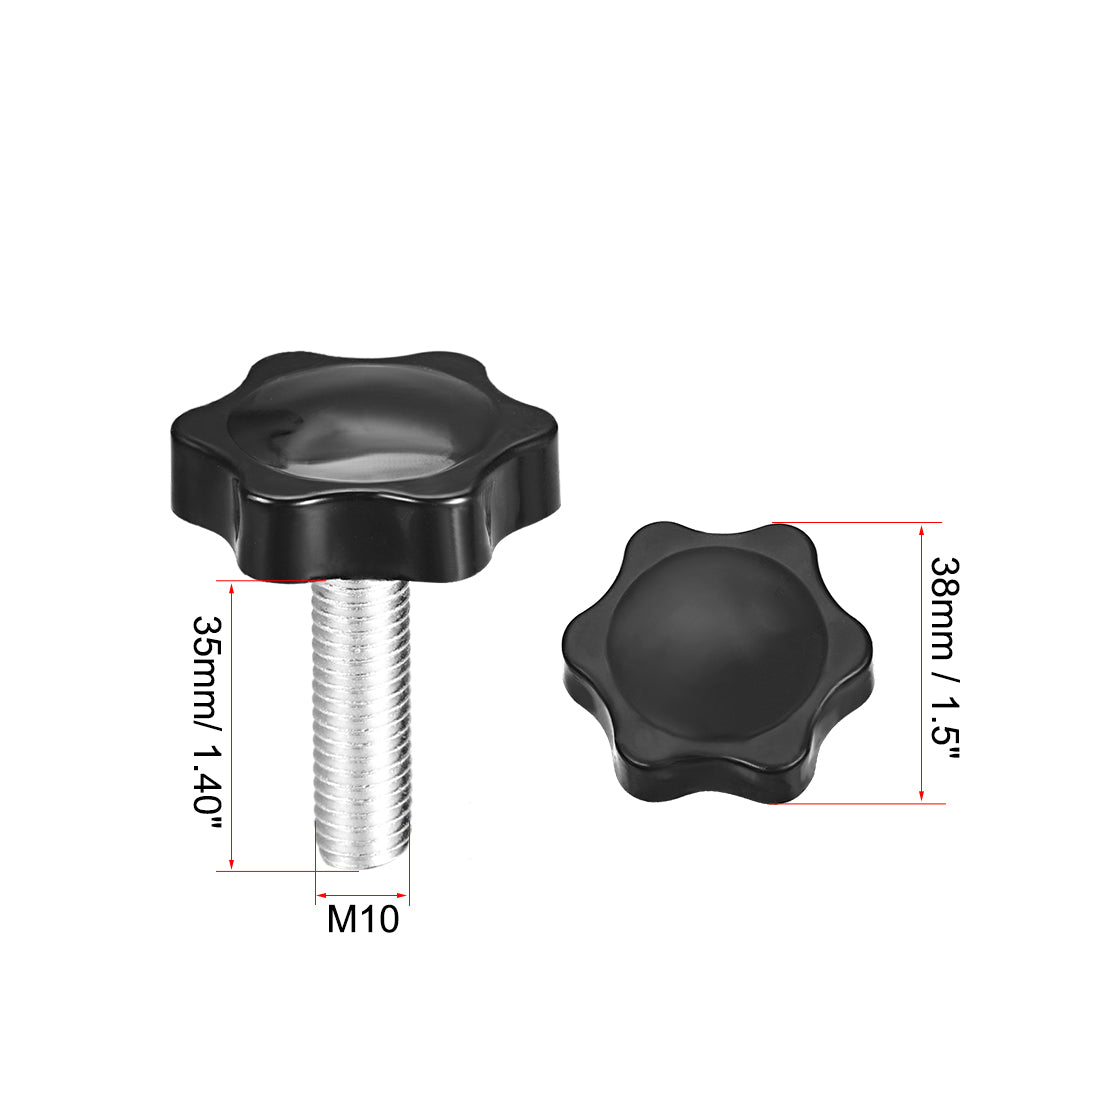 uxcell Uxcell Clamping Screw Knob Plum Hex Shaped Grips Star Knob Male Thread 2pcs